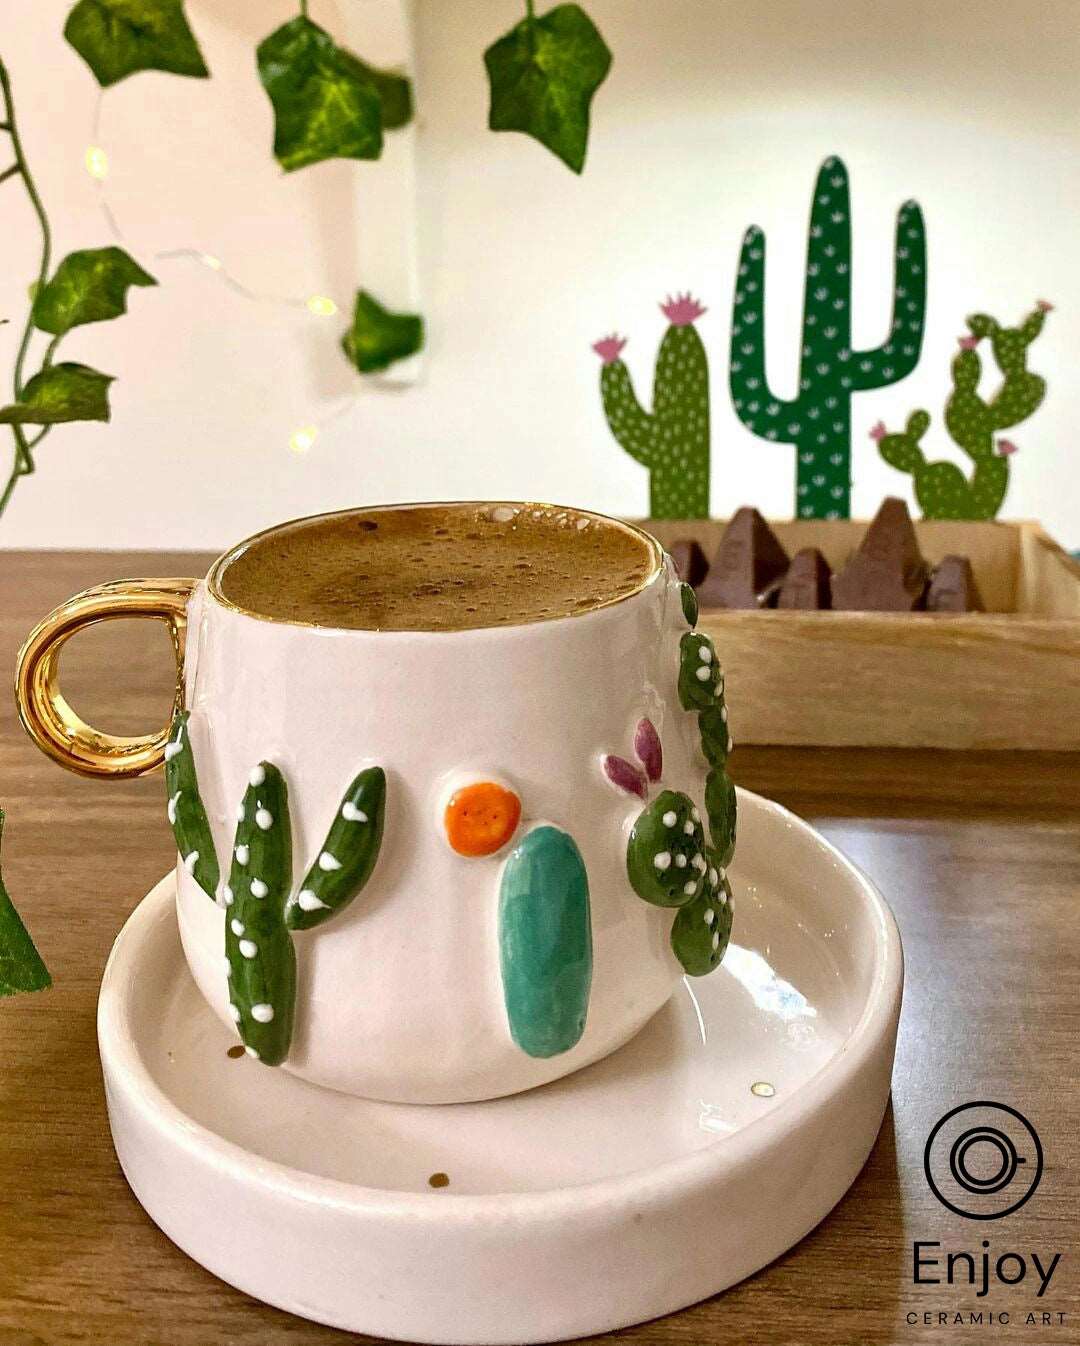 A mug with 3D cactus designs, a gold handle, and coffee, set against a backdrop of ivy and a cactus illustration.